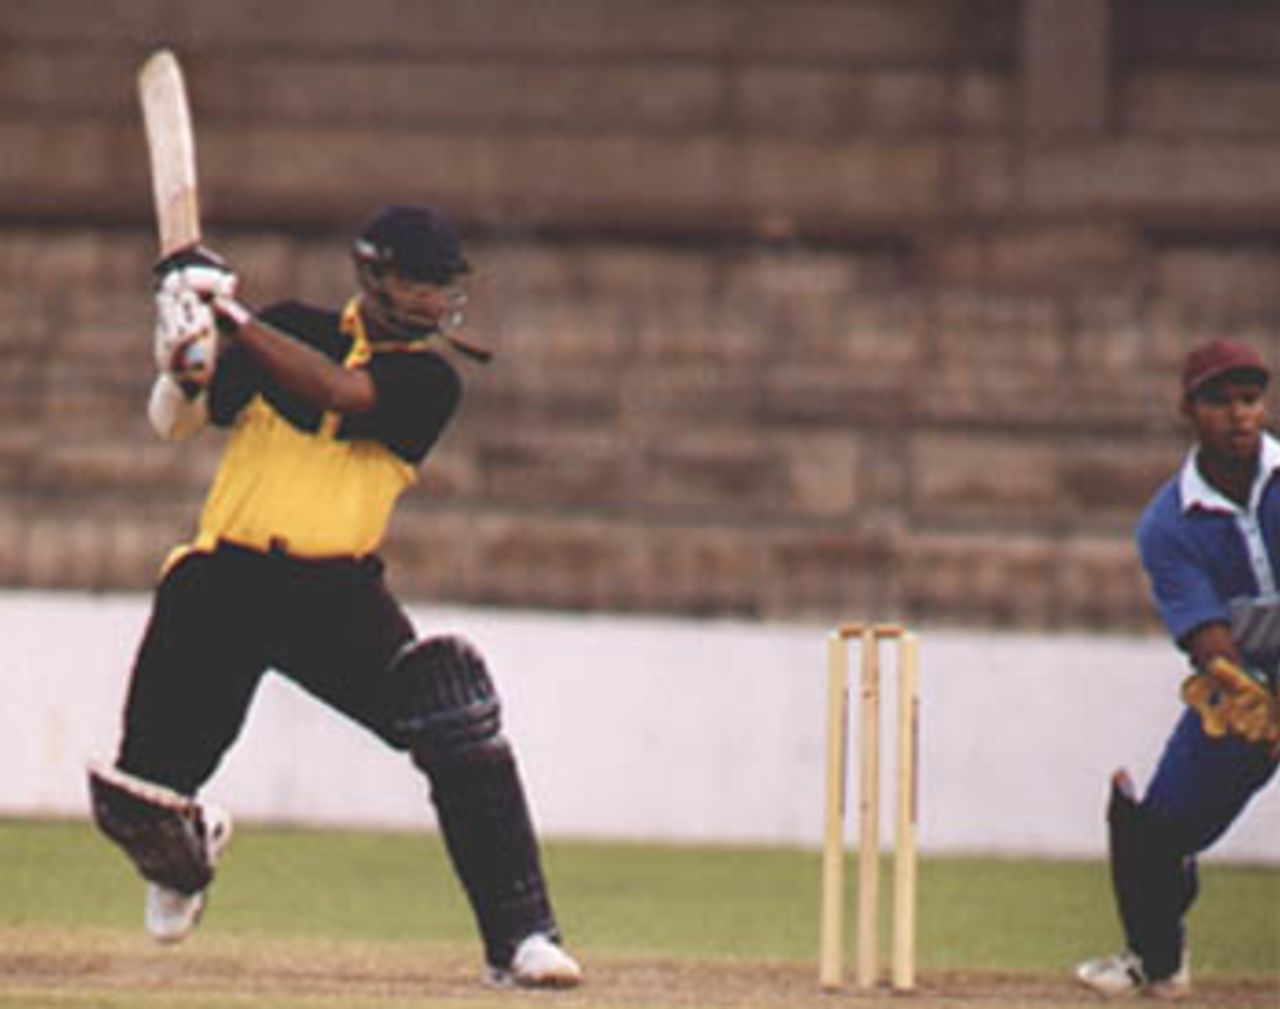 Hemantha Wickramaratne top scores with 49 runs, in the Premier Limited Over Tournament semi finals